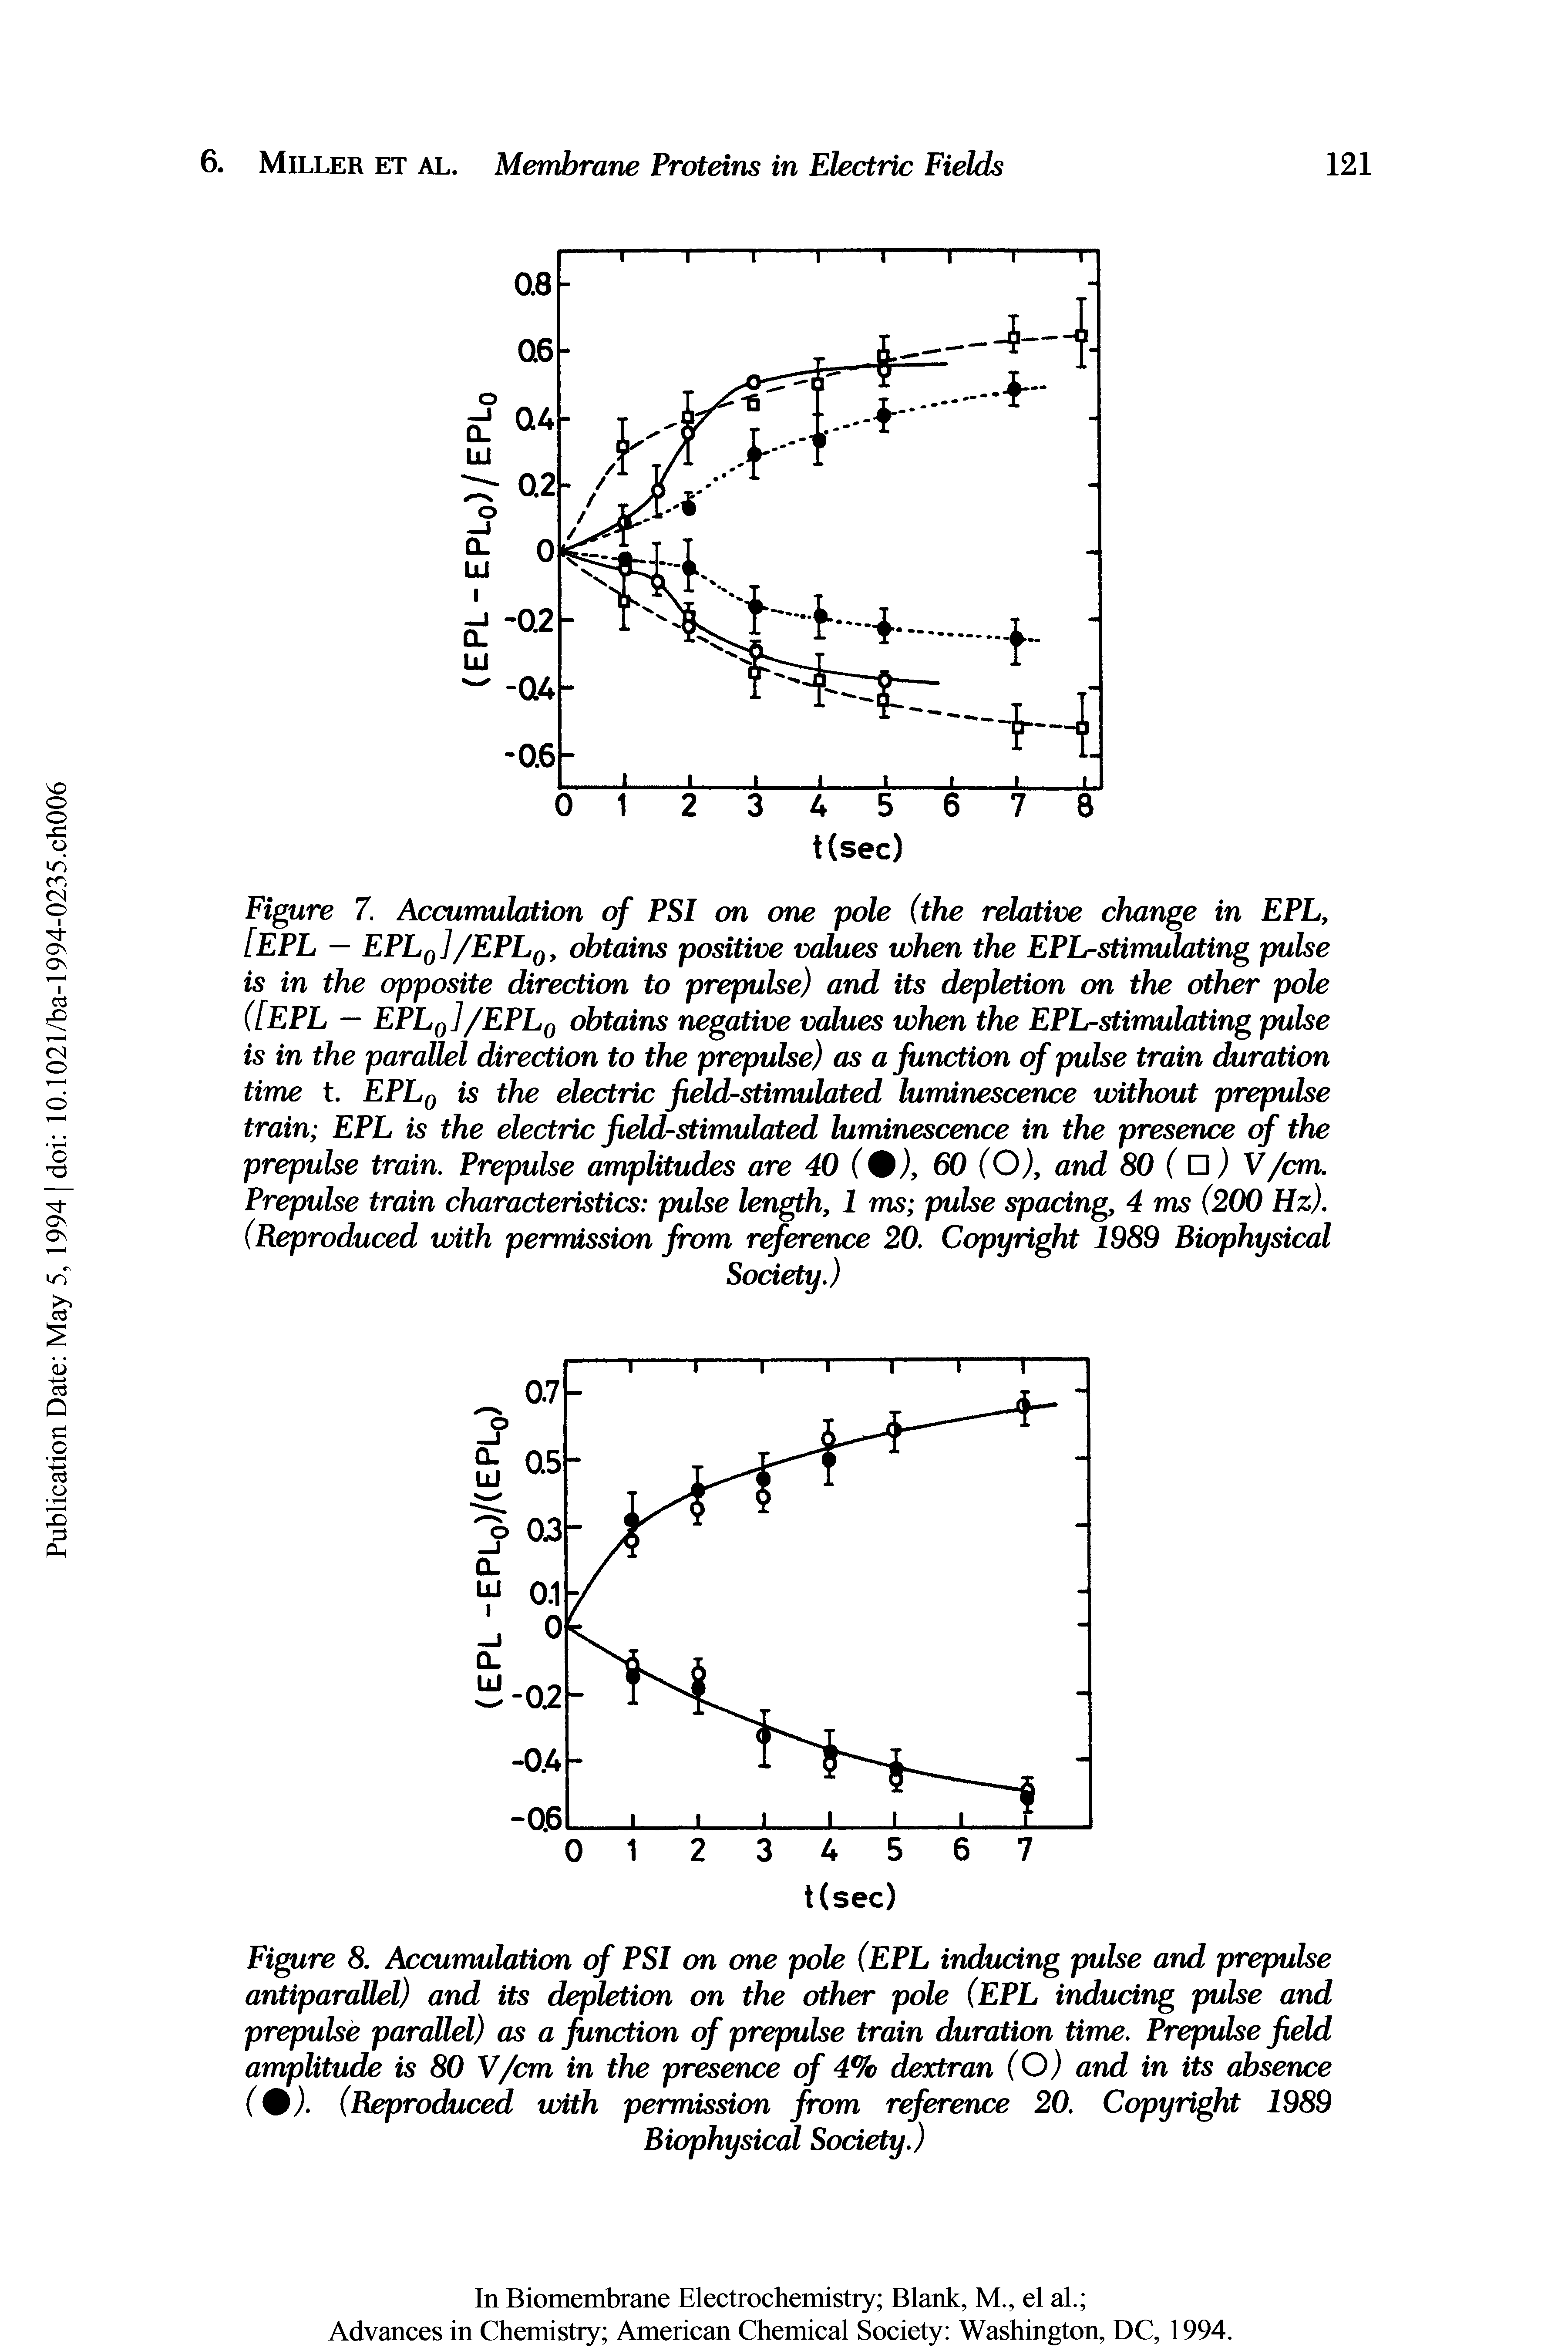 Figure 8. Accumulation of PSI on one pole (EPL inducing pulse and prepulse antiparallel) and its depletion on the other pole (EPL inducing pulse and prepulse parallel) as a function of prepulse train duration time. Prepulse field amplitude is 80 V/cm in the presence of 4% dextran (O) and in its absence (%). (Reproduced with permission from reference 20. Copyright 1989...